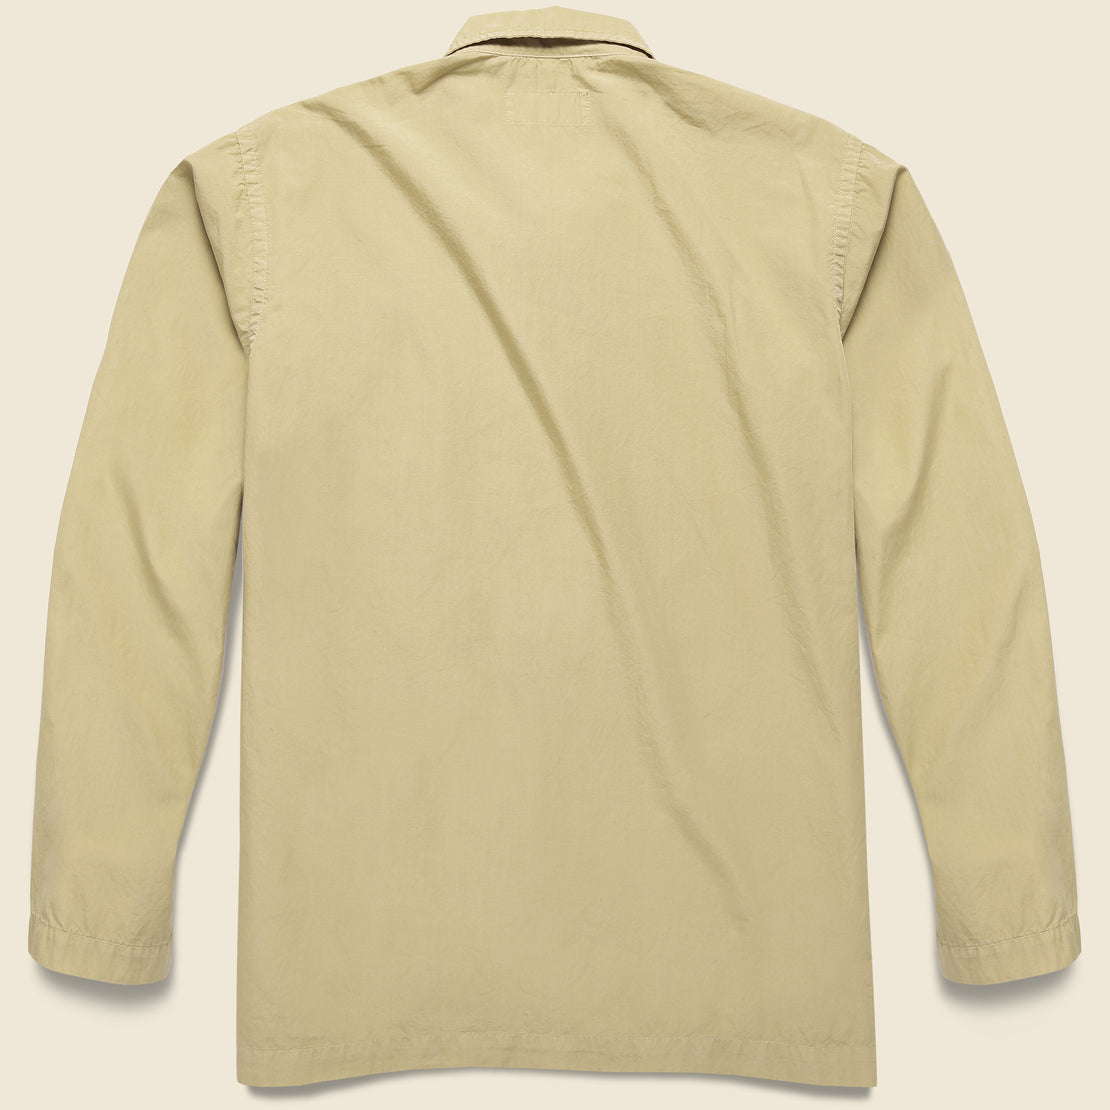 Bakers Poplin Overshirt - Sand - Universal Works - STAG Provisions - Tops - L/S Woven - Overshirt